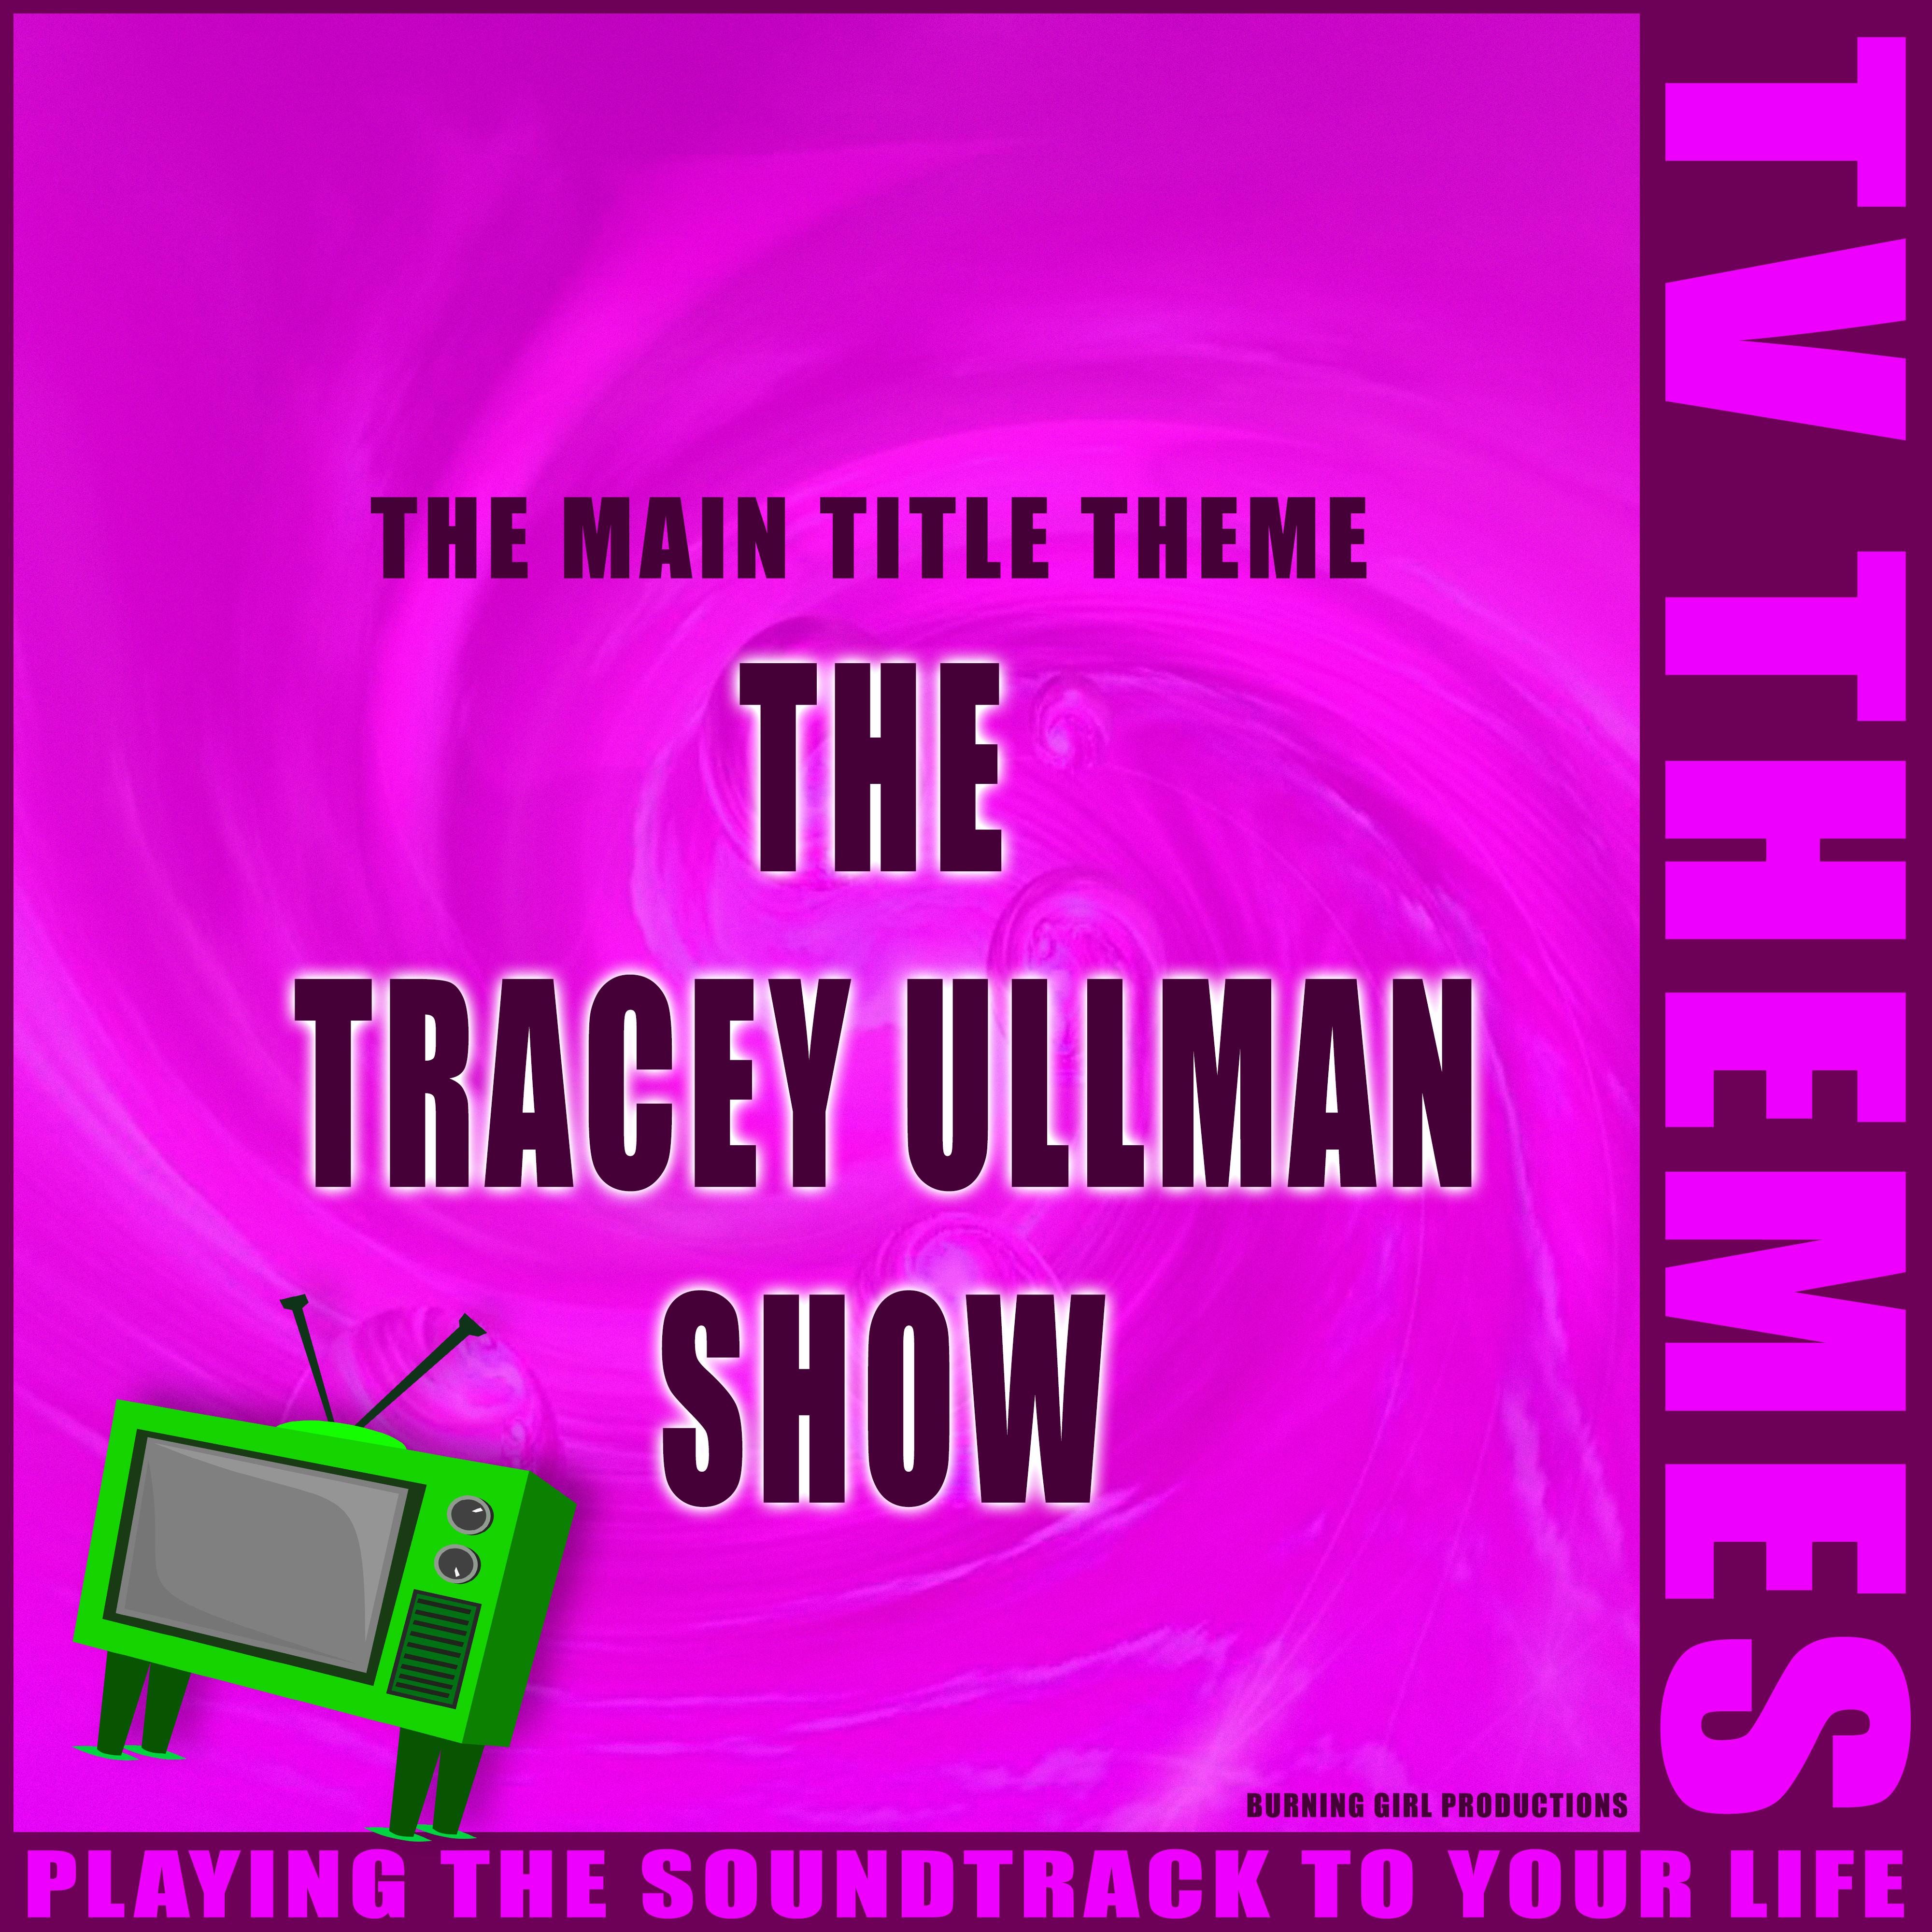 The Tracey Ullman Show - The Main Title Theme